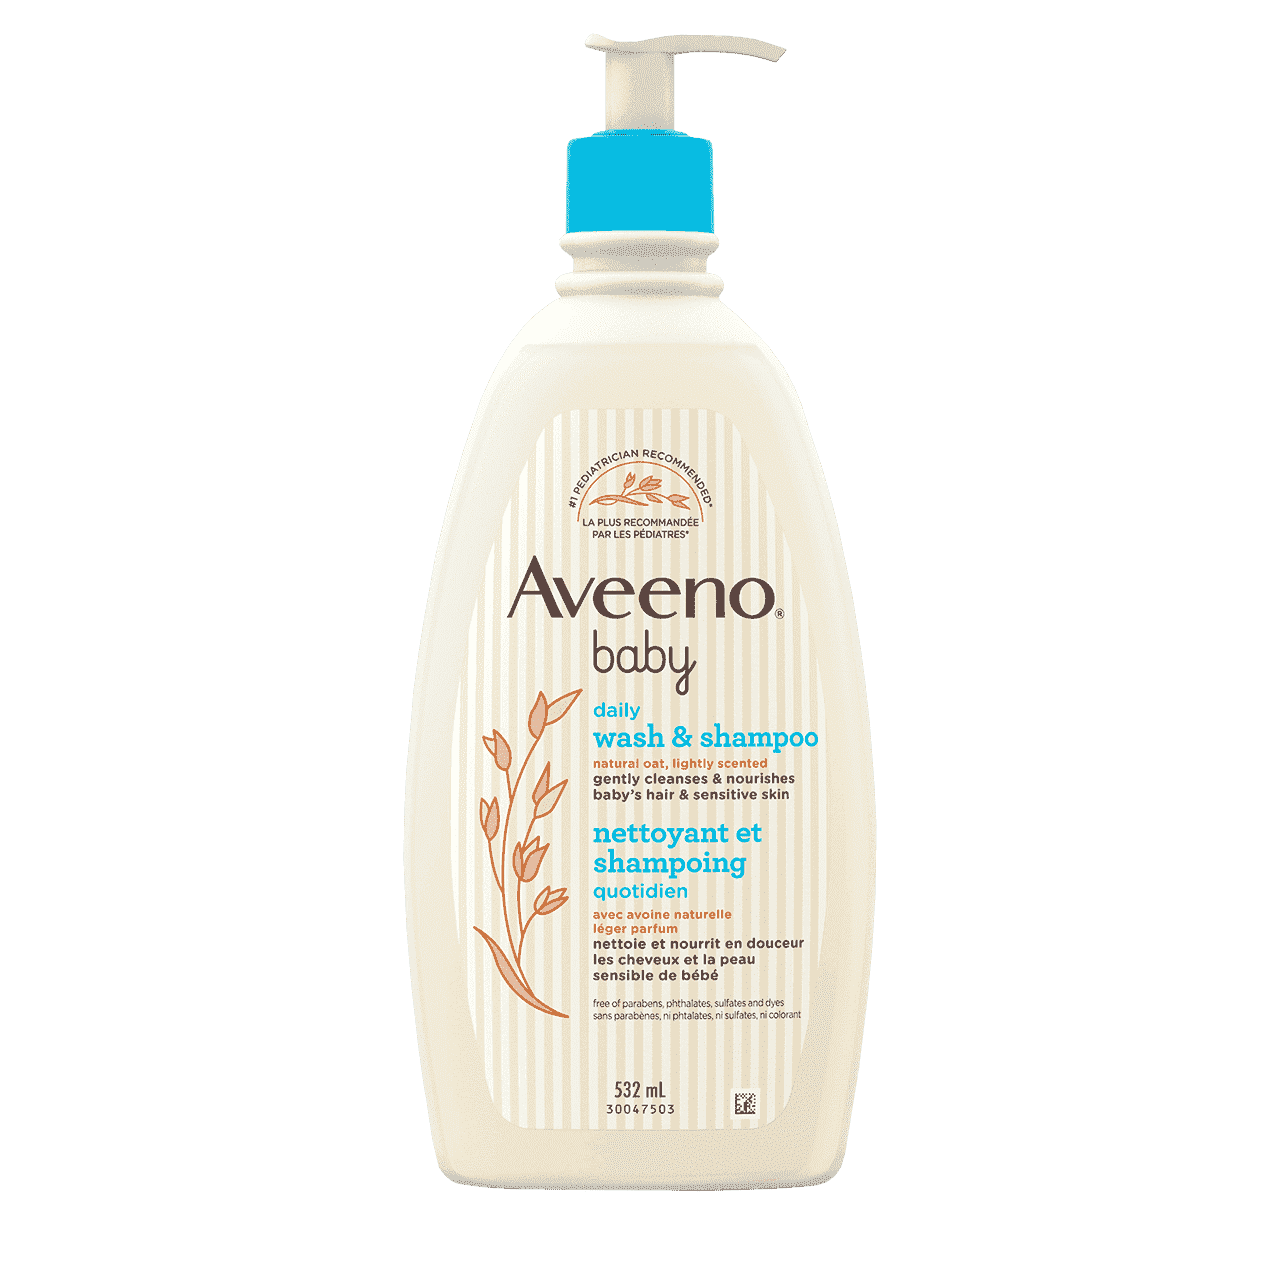 AVEENO® BABY Wash &amp; Shampoo with natural Oat Extract, 532ml bottle